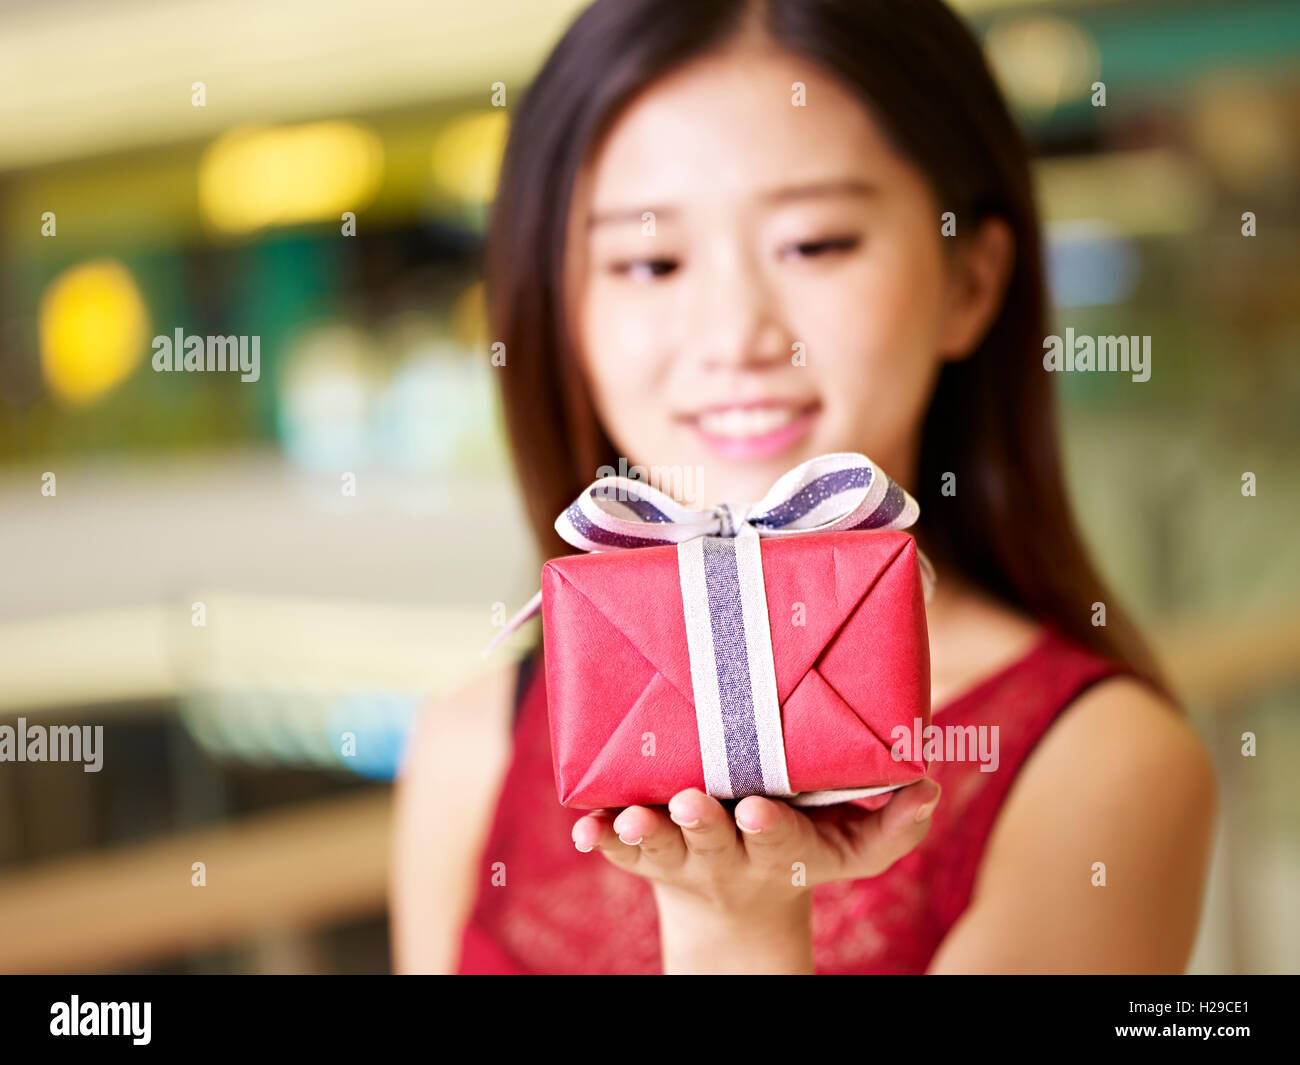 beautiful young asian woman showing a wrapped gift, selective focus on the gift box Stock Photo